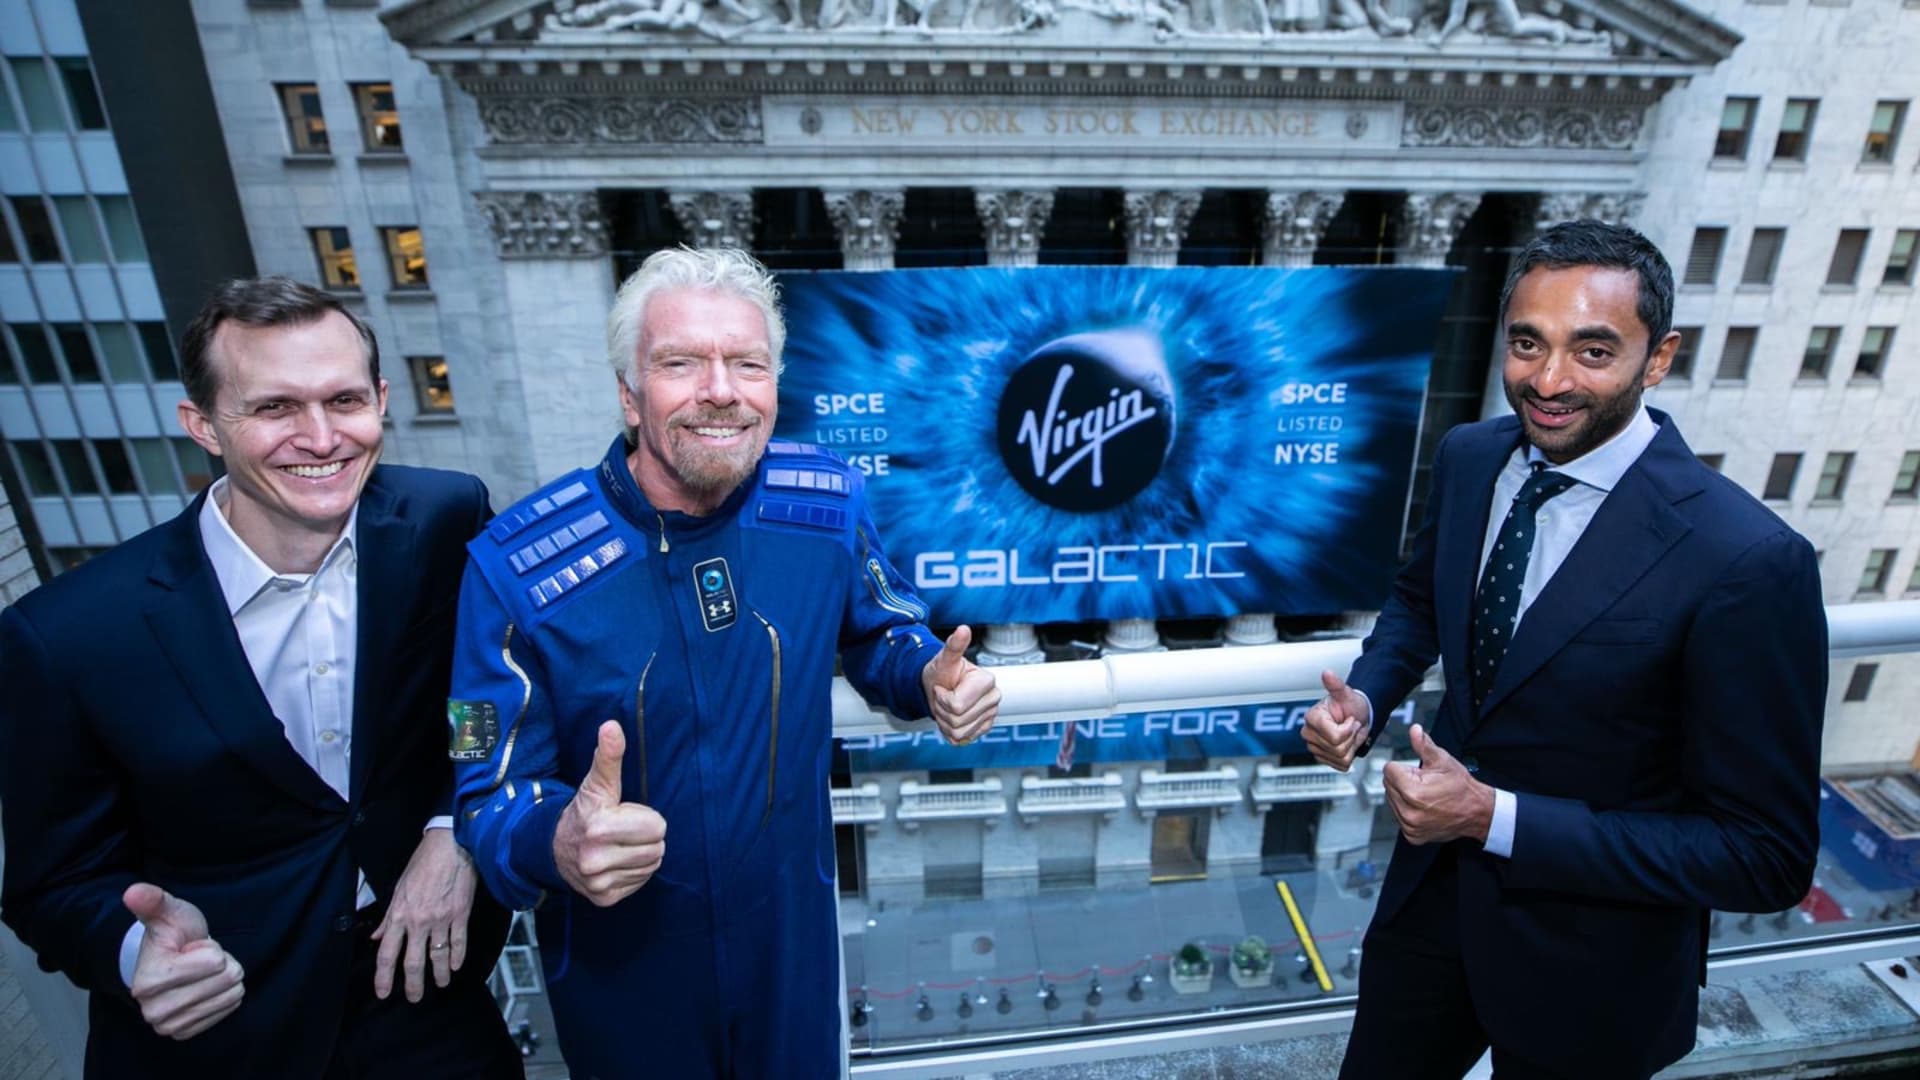 Virgin Galactic leaders in front of the New York Stock Exchange, from left: CEO George Whitesides, founder Richard Branson and Chairman Chamath Palihapitiya.